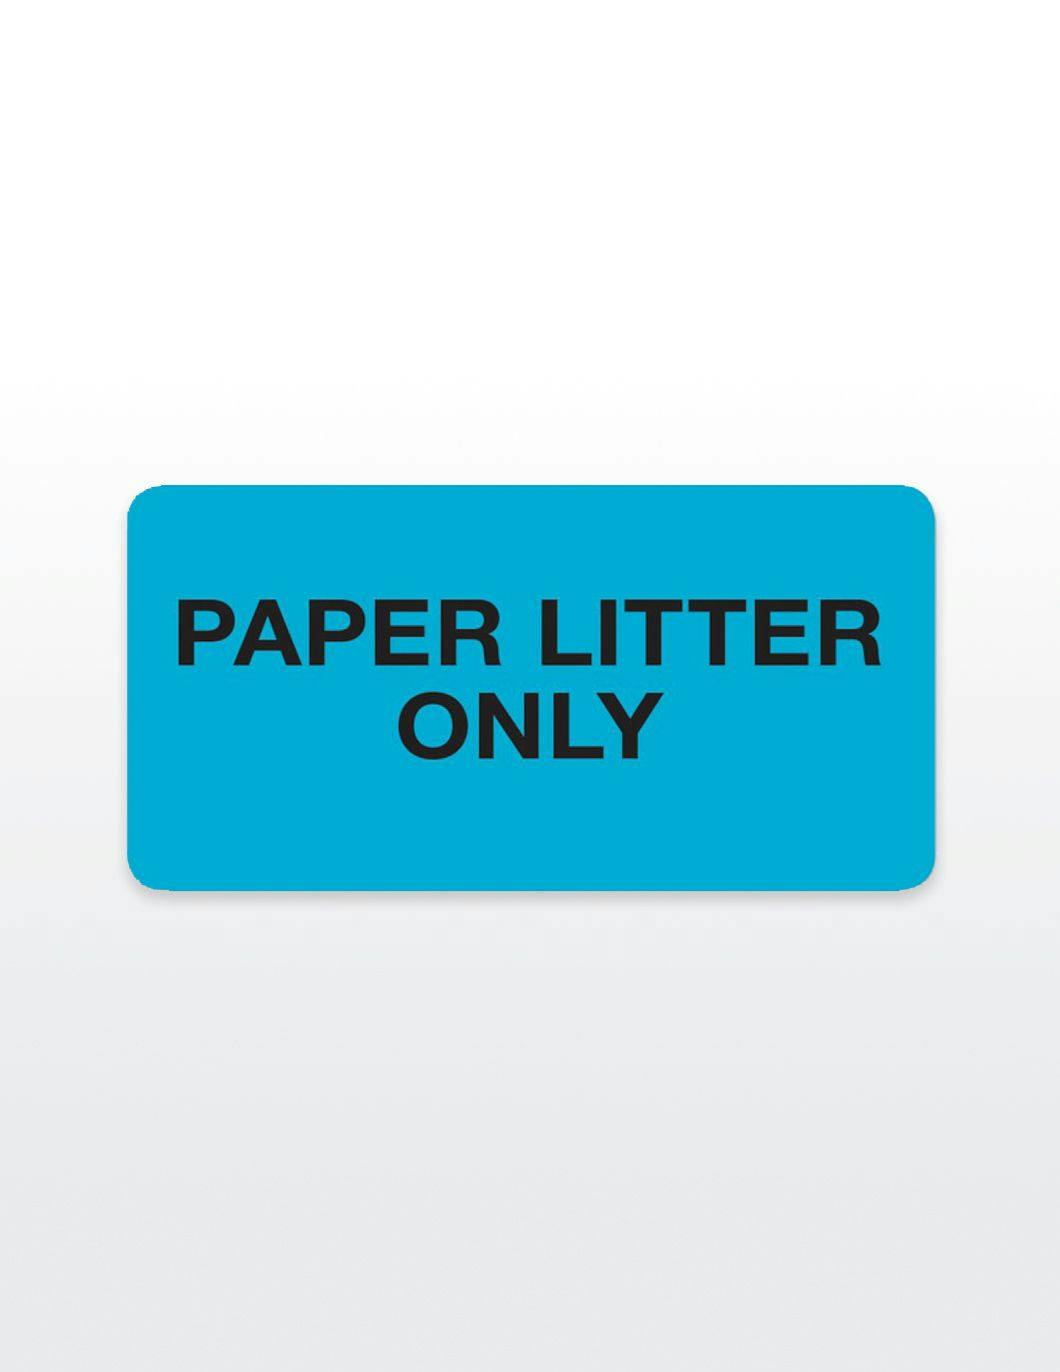 paper-litter-only-medical-record-stickers